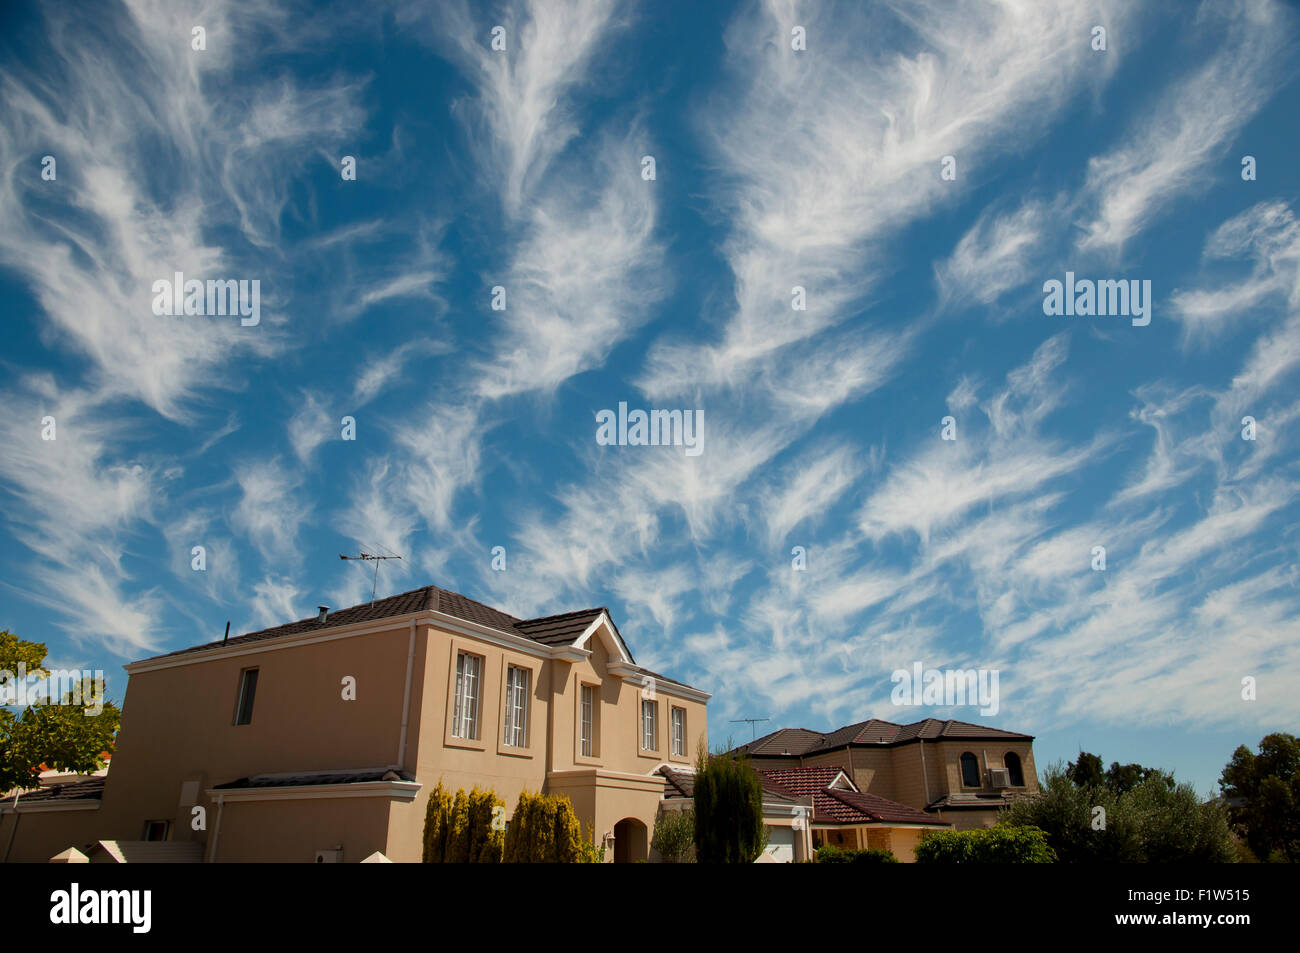 Cirrus Cloud Formation Stock Photo